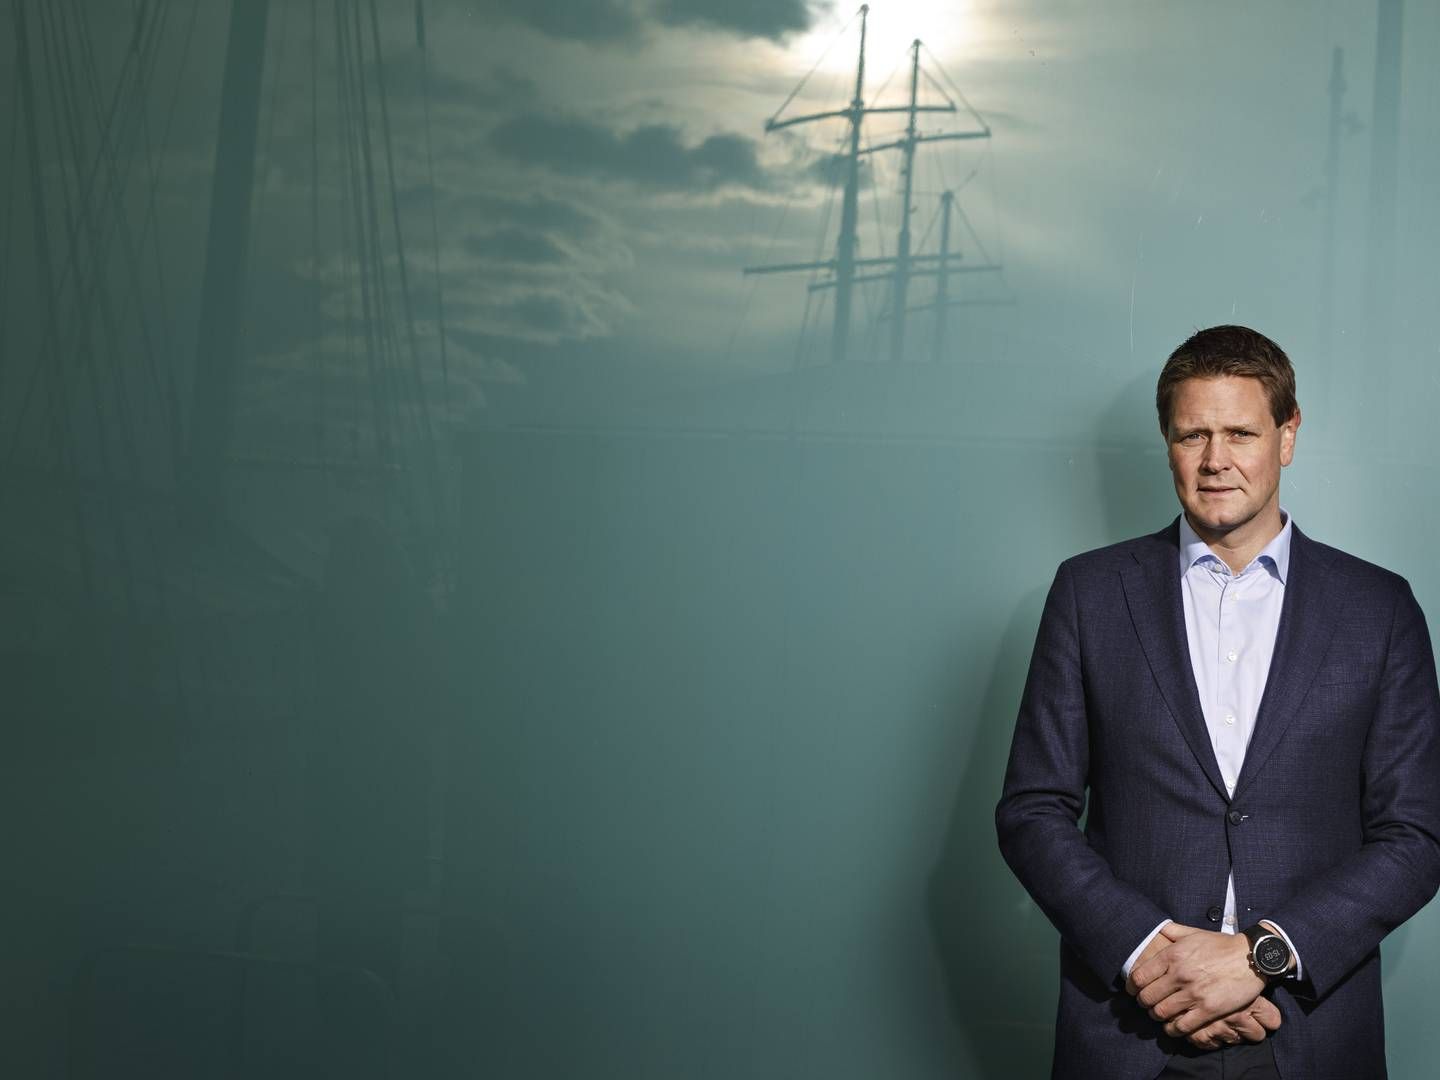 "The EU and Norwegian authorities must take a clear stance on sanctions against oil cargoes from Russia," says Norwegian Shipowners' Association CEO Harald Solberg as cited by NRK. | Photo: Norges Rederiforbund